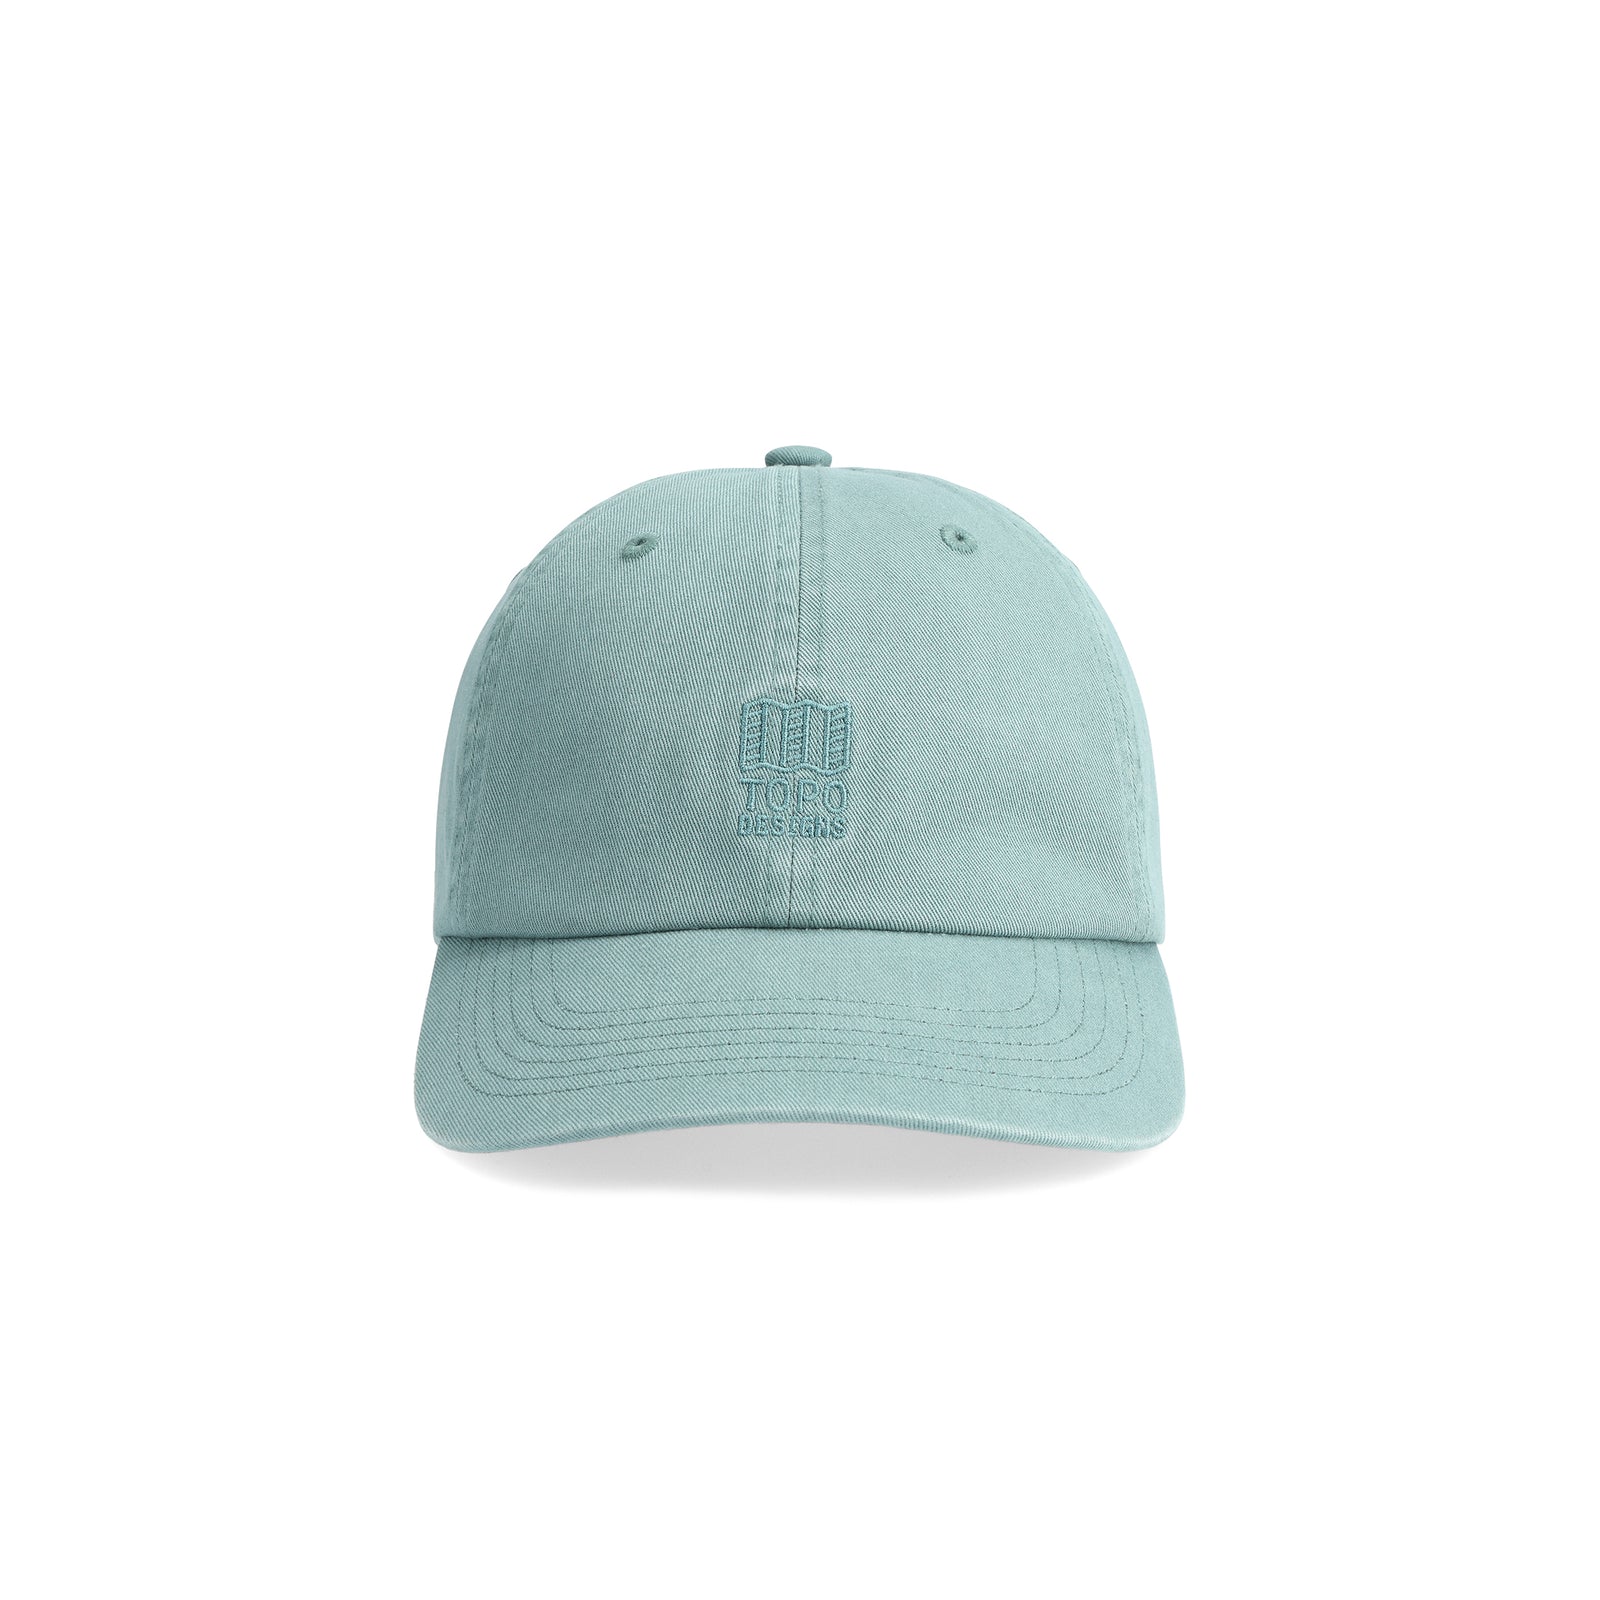 Front View of Topo Designs Dirt Ballcap in "Sea Pine"